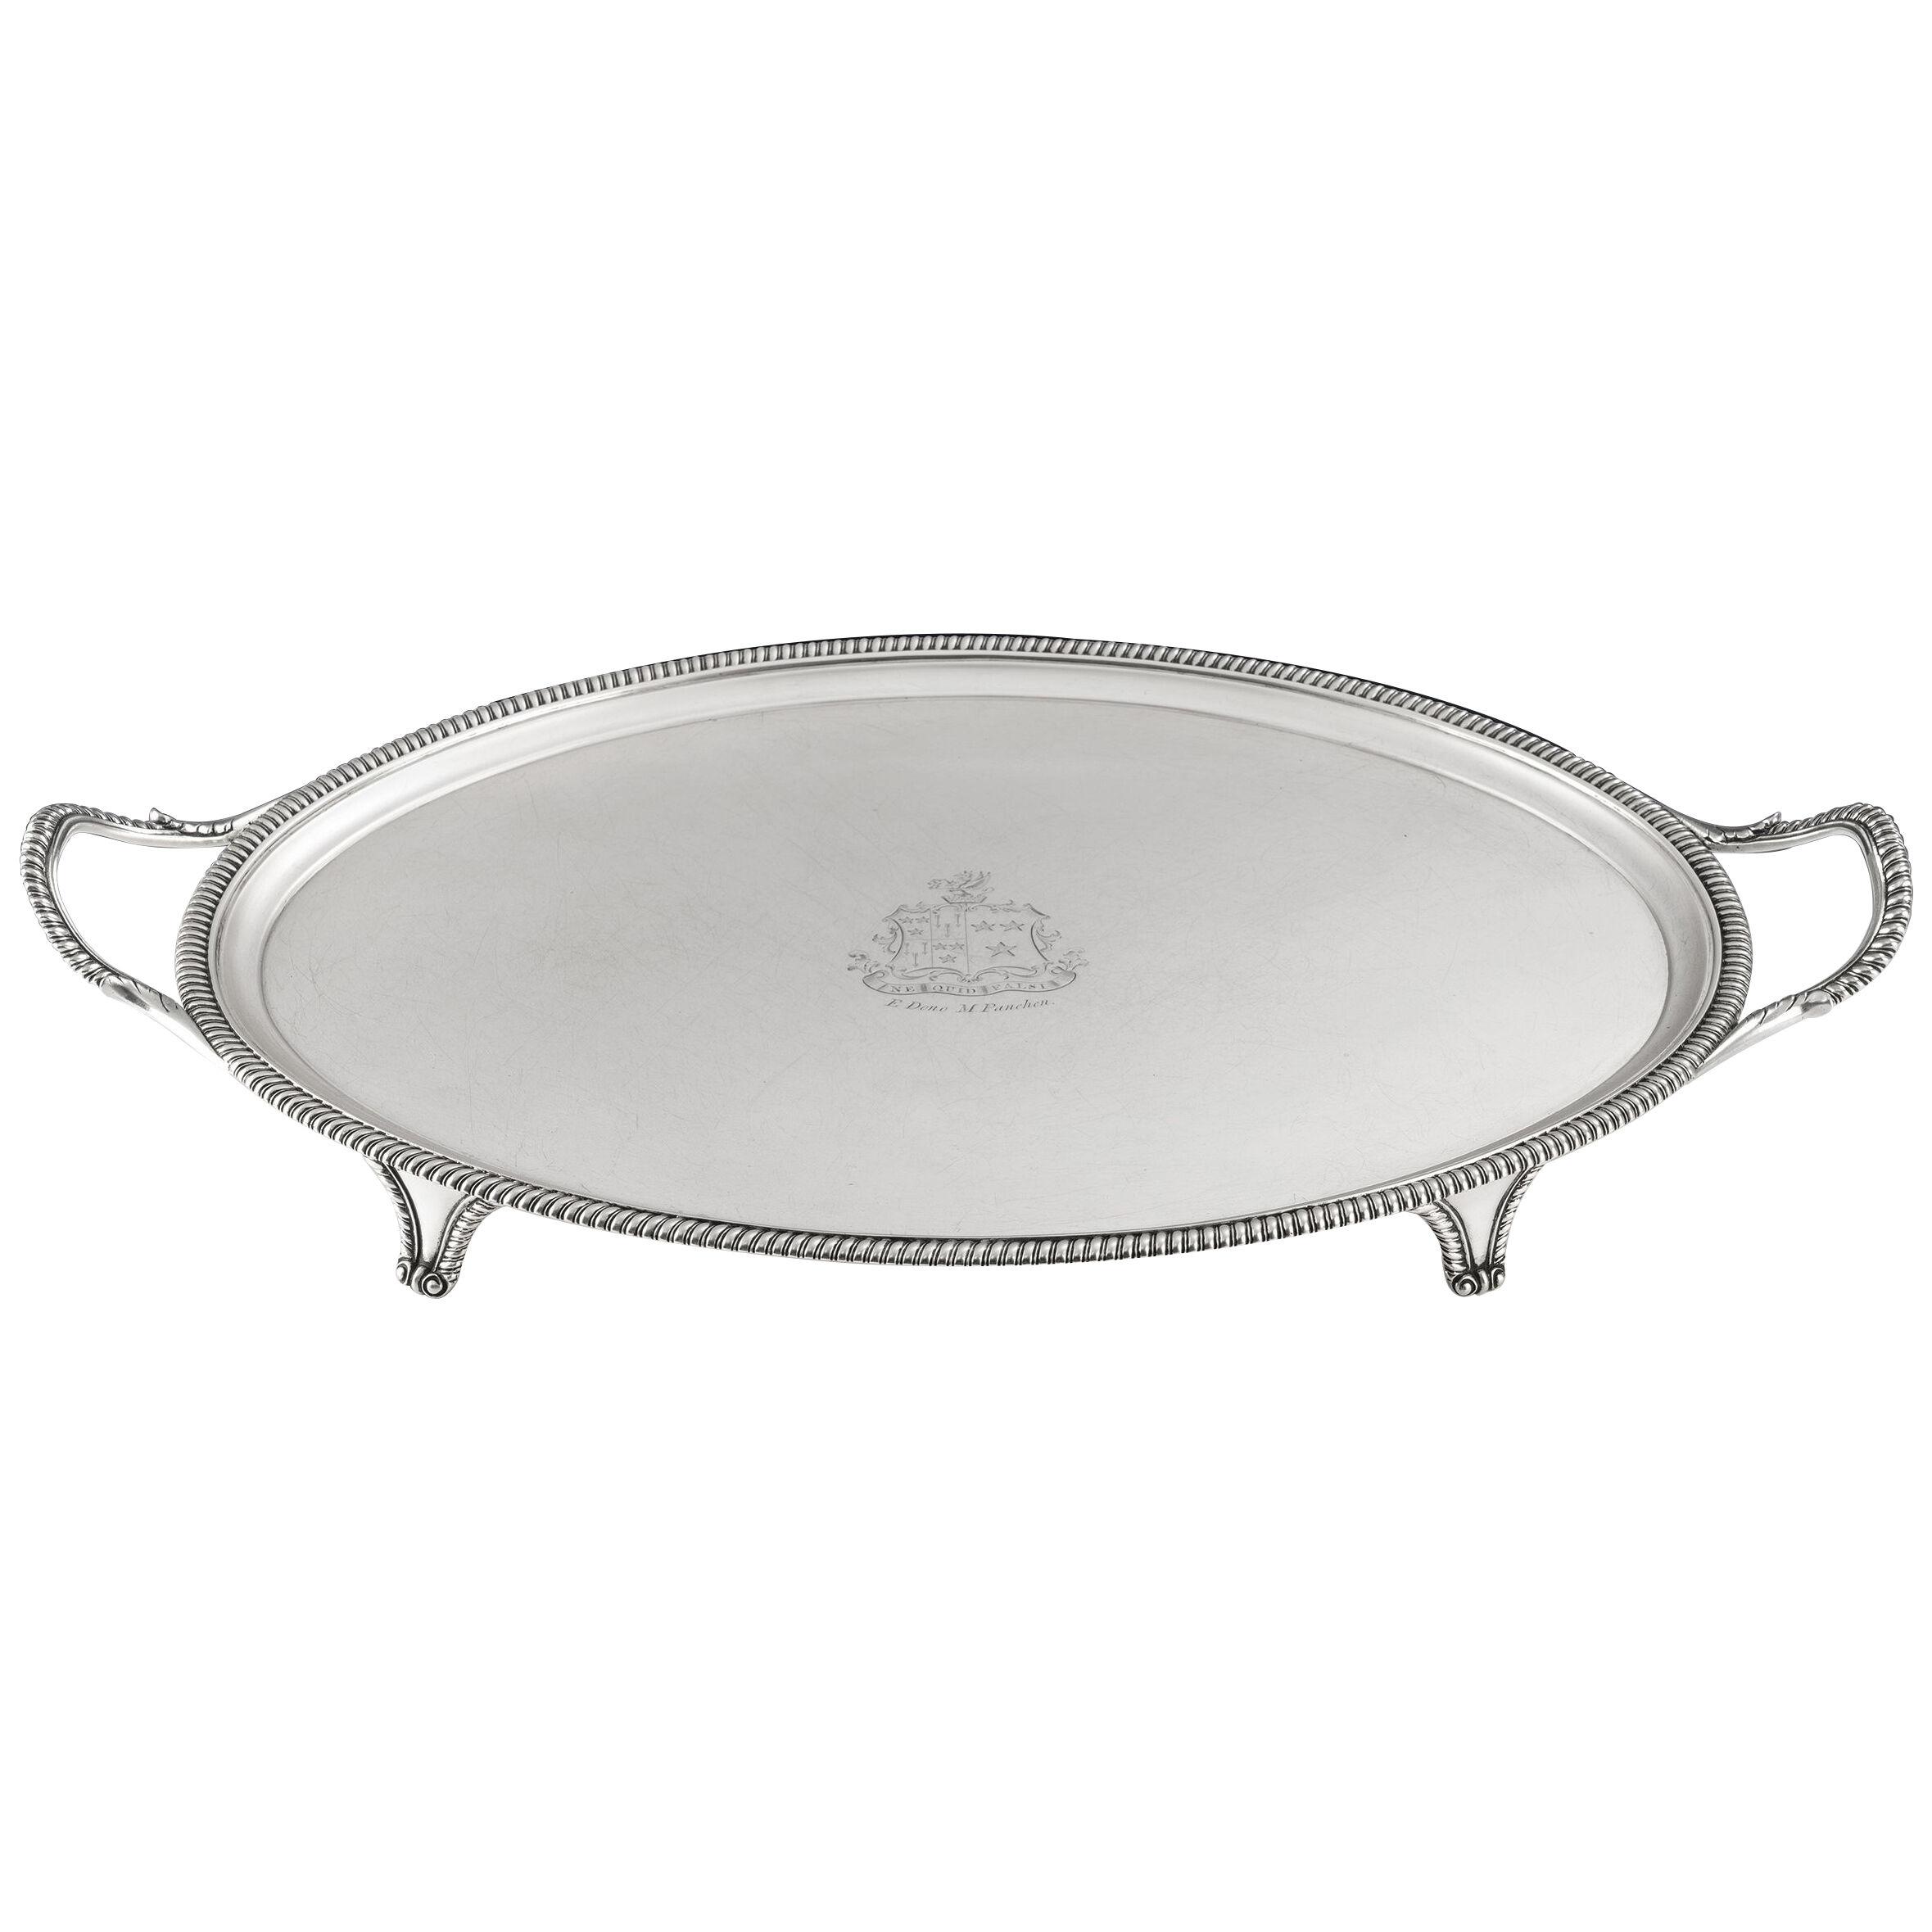 A George III Tea Tray made in London in 1801 by Crouch & Hannam.